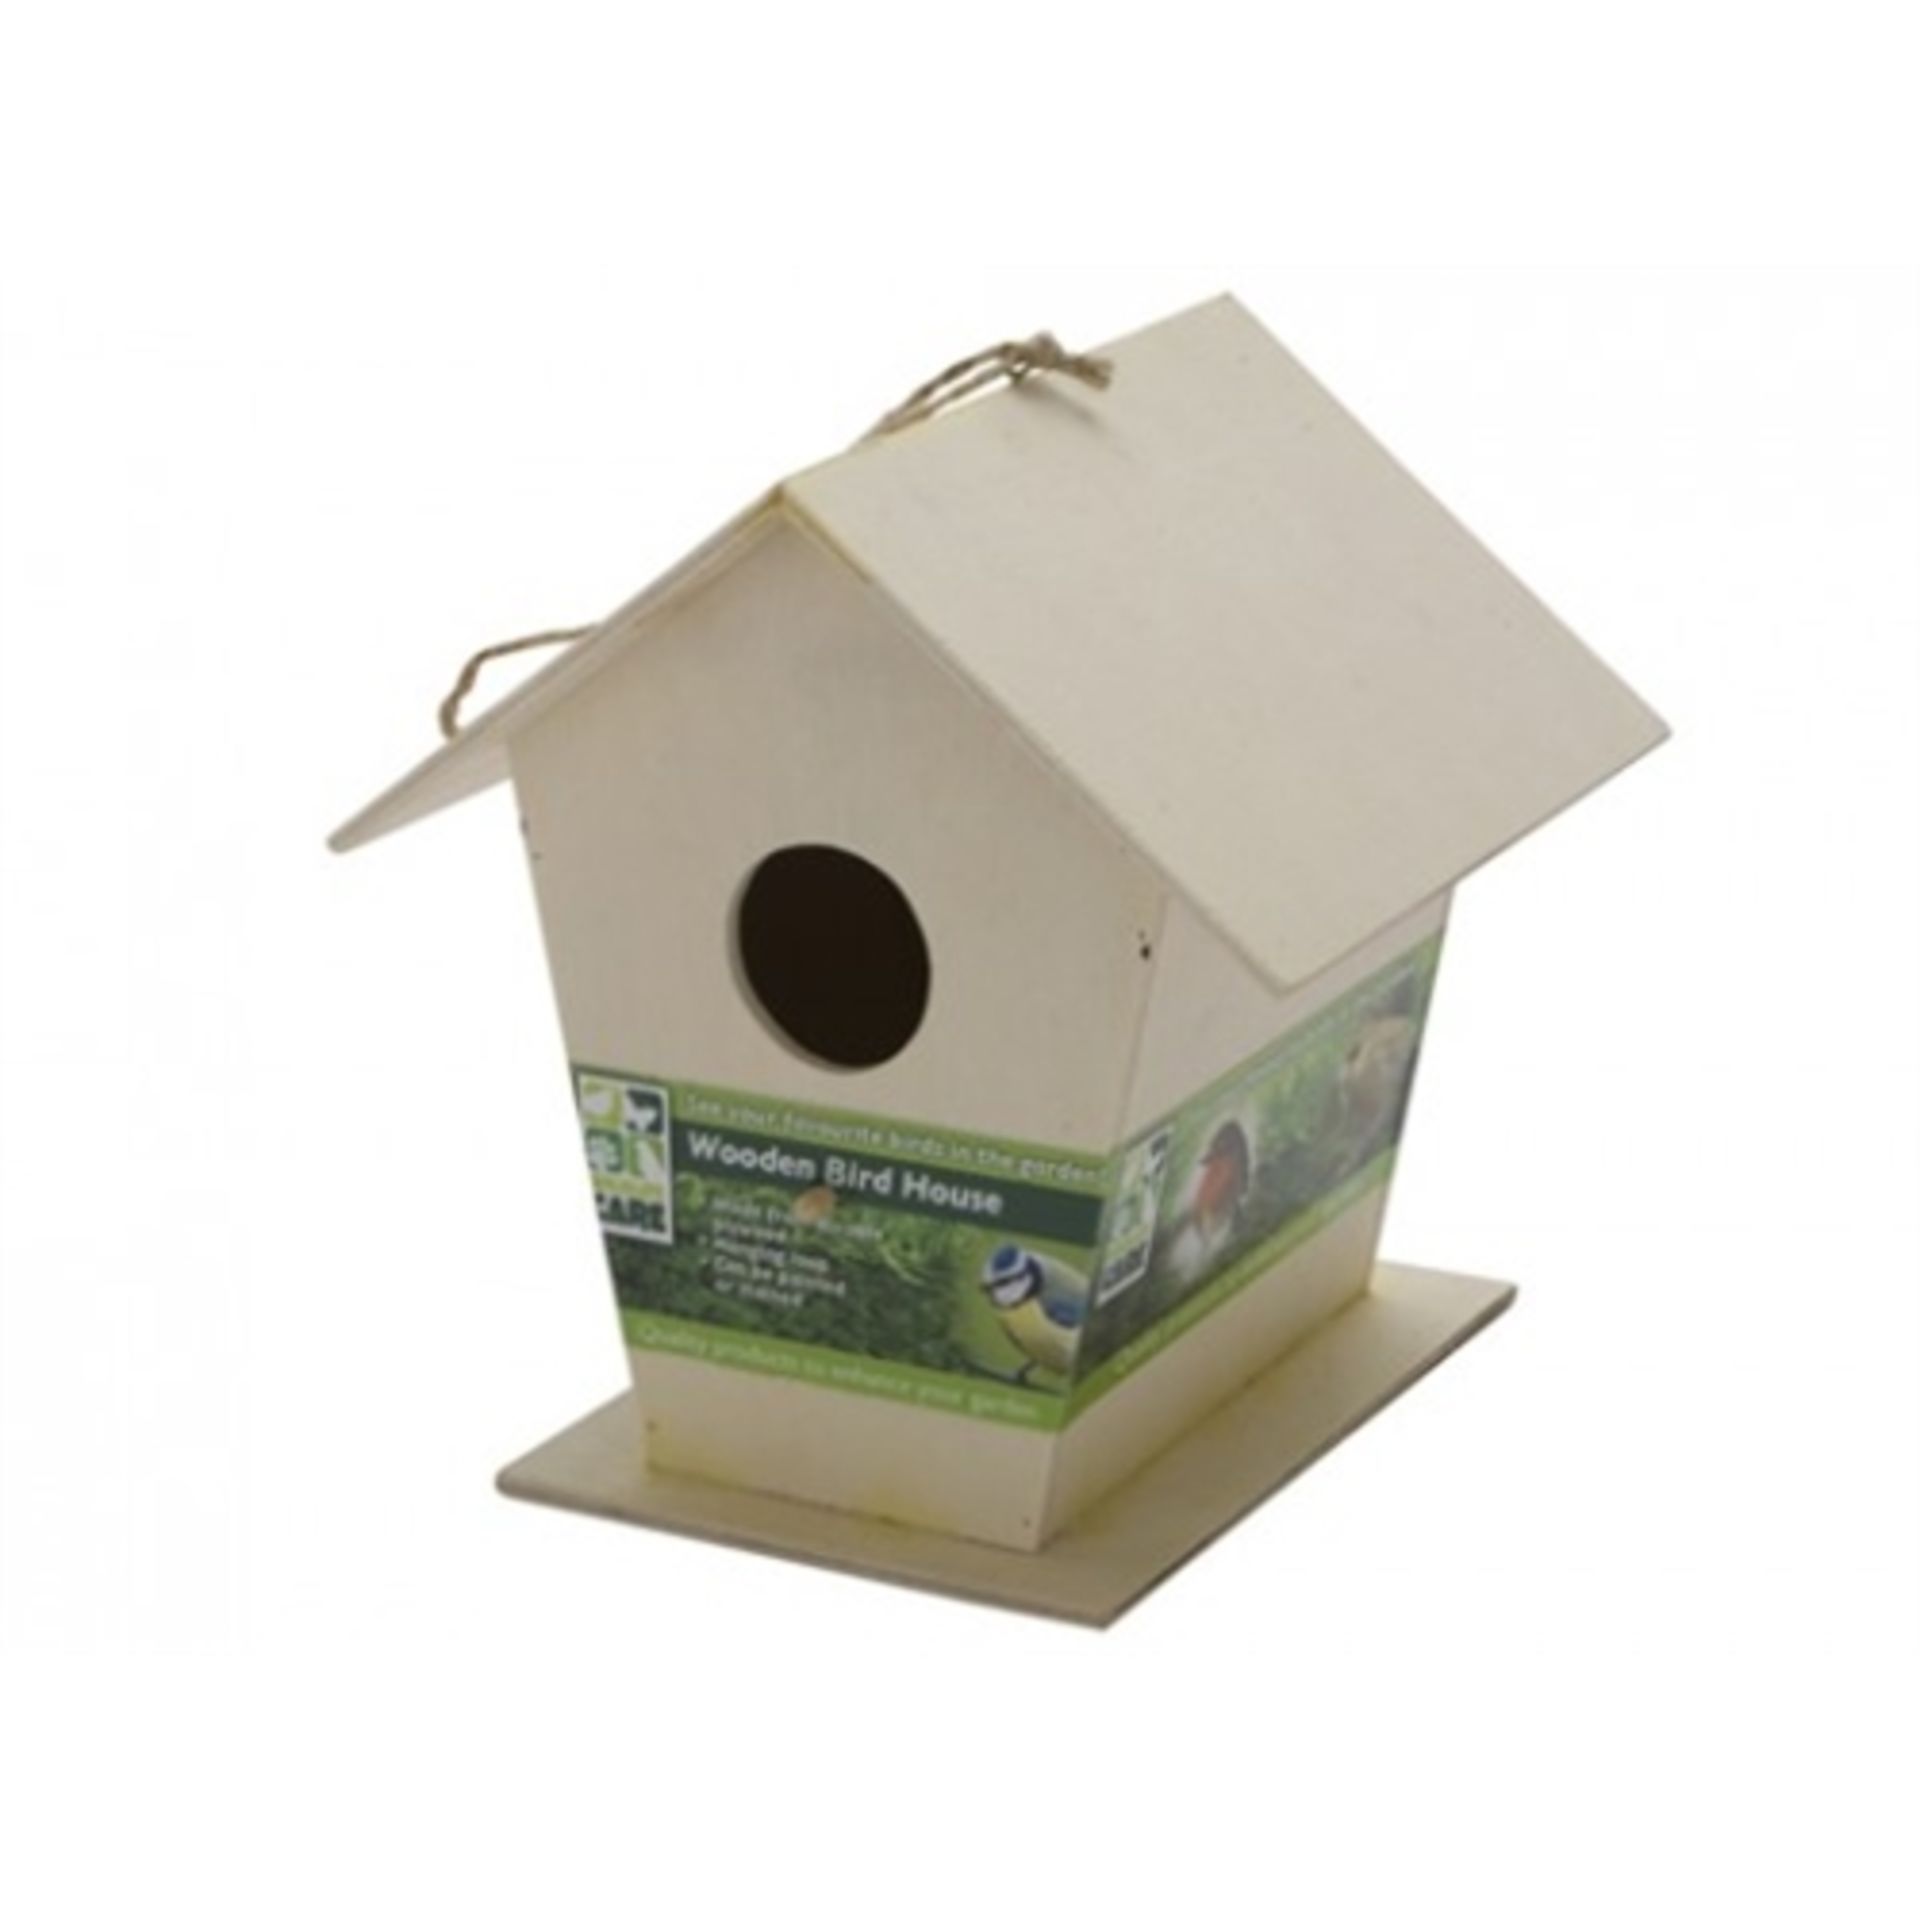 V Brand New Wooden Bird House 17 x 15cm X 2 YOUR BID PRICE TO BE MULTIPLIED BY TWO